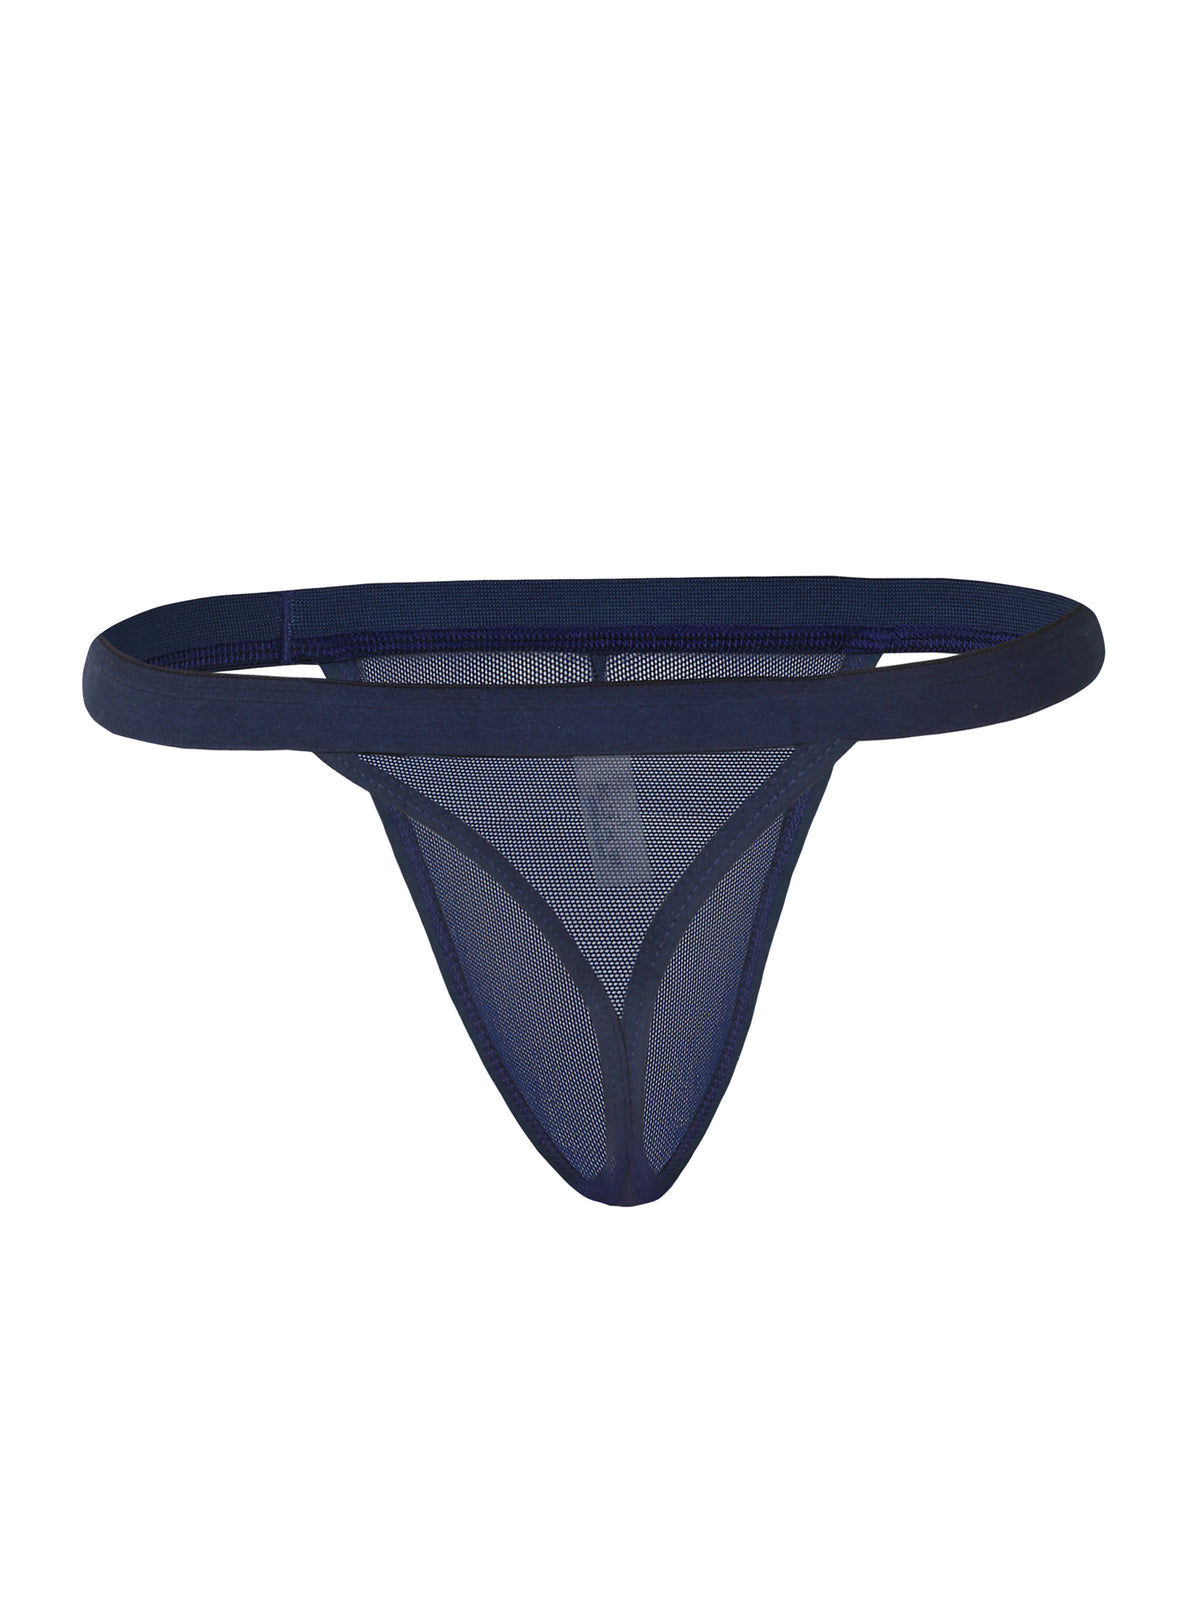 Baoblaze C-string Thong Invisible Underwear Panty for Men - India